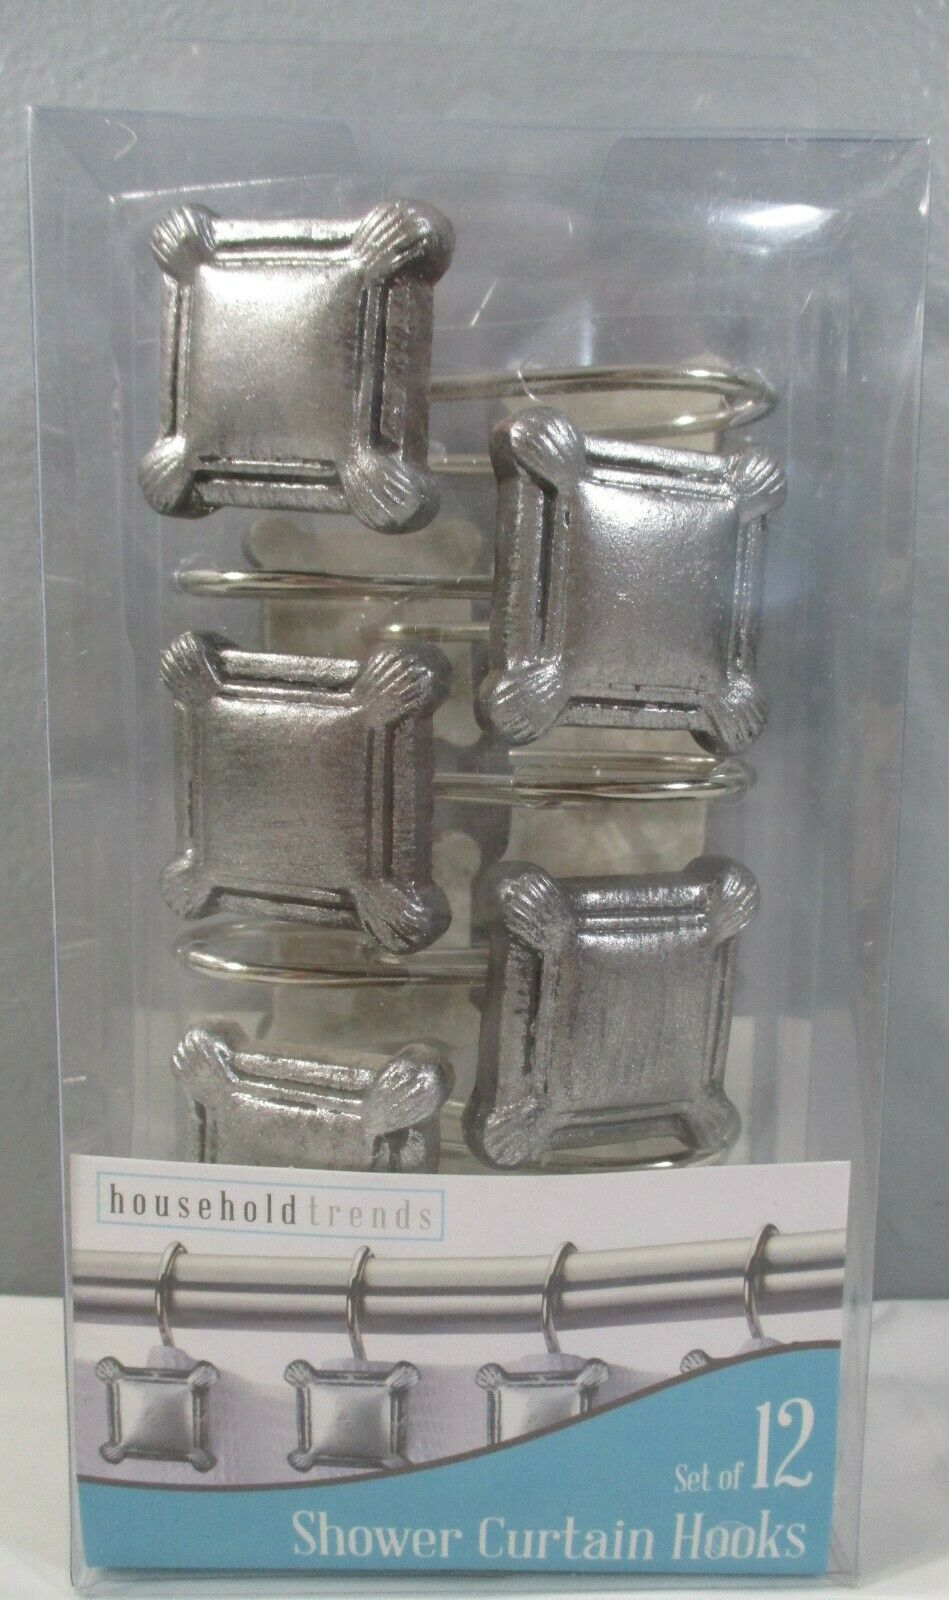 New Set Of 12 Bathroom Shower Curtain Hooks Square Decorative Silver Metal Look